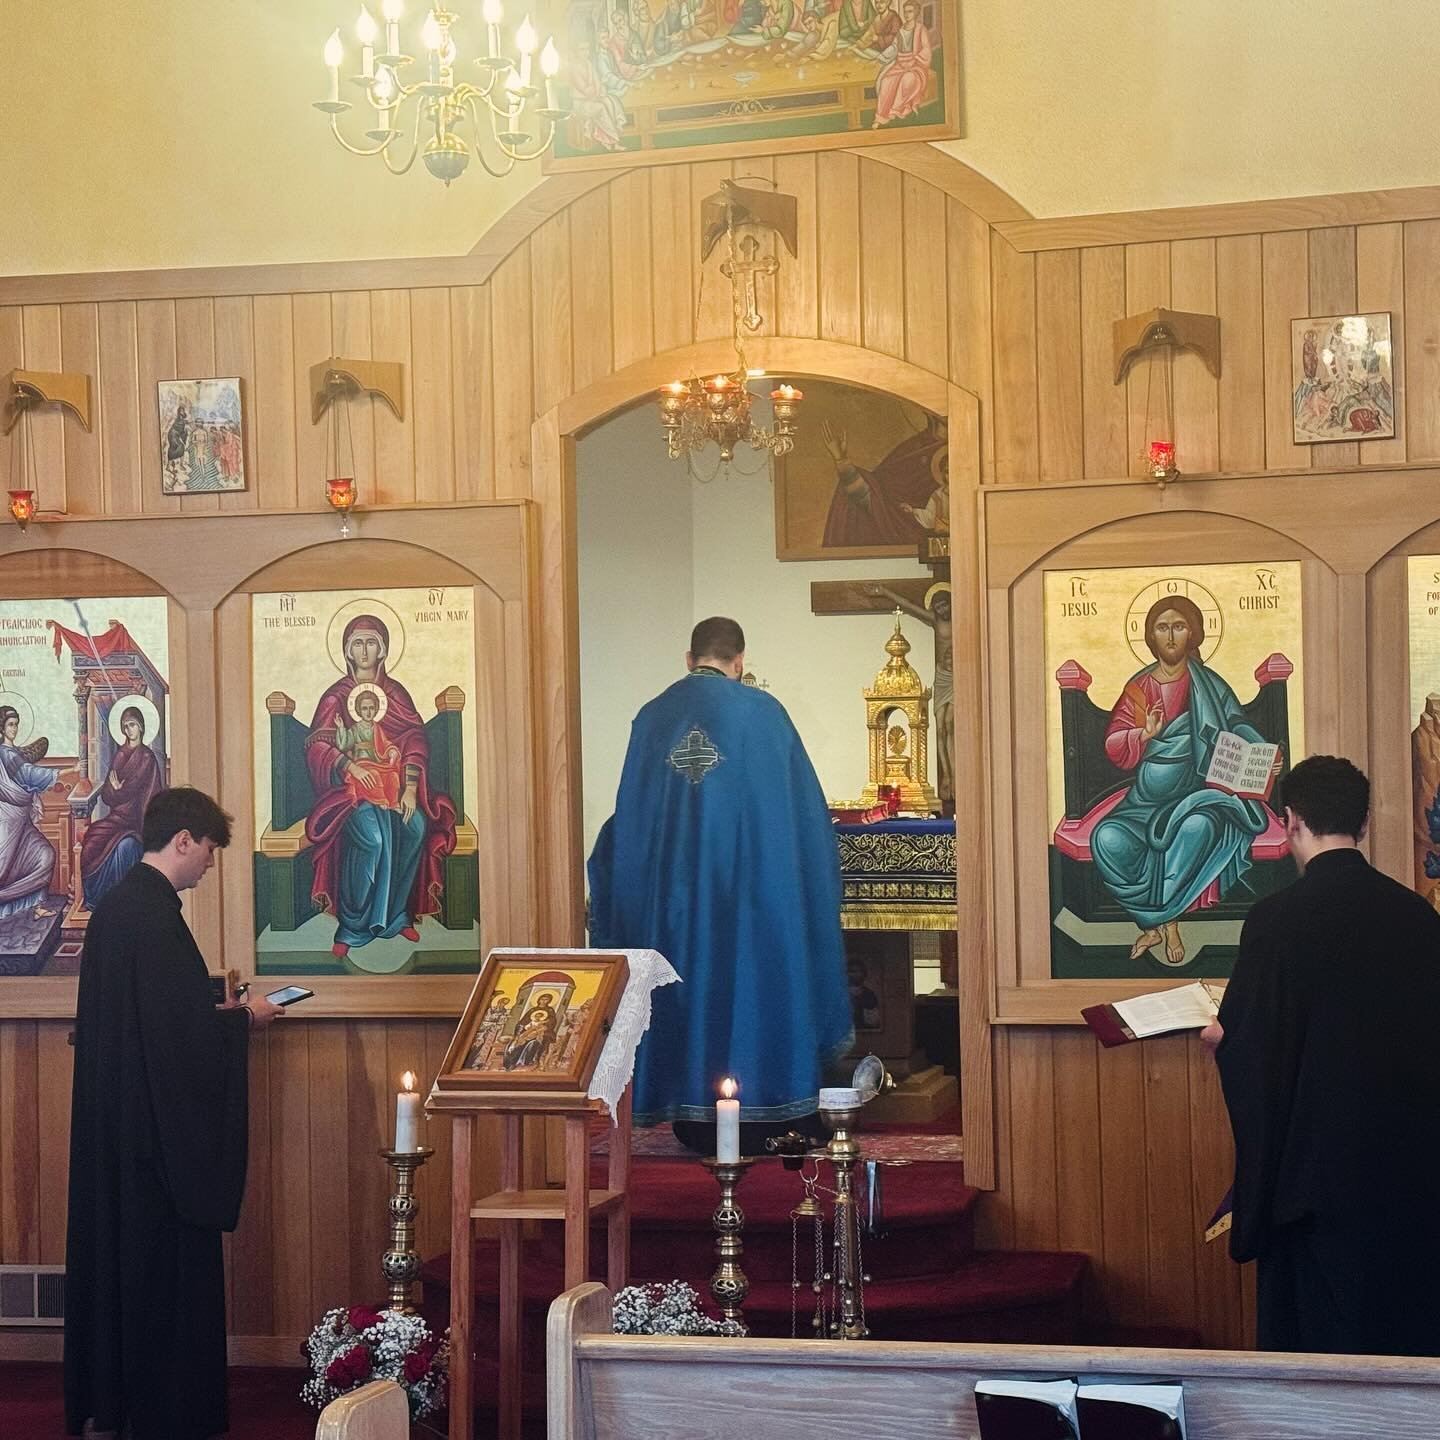 This evening we chanted the Akathist to the Theotokos in its entirety. May our Most Blessed Theotokos intercede for us as we now turn our minds and hearts toward the ascent to Jerusalem with our Lord and Savior Jesus Christ.